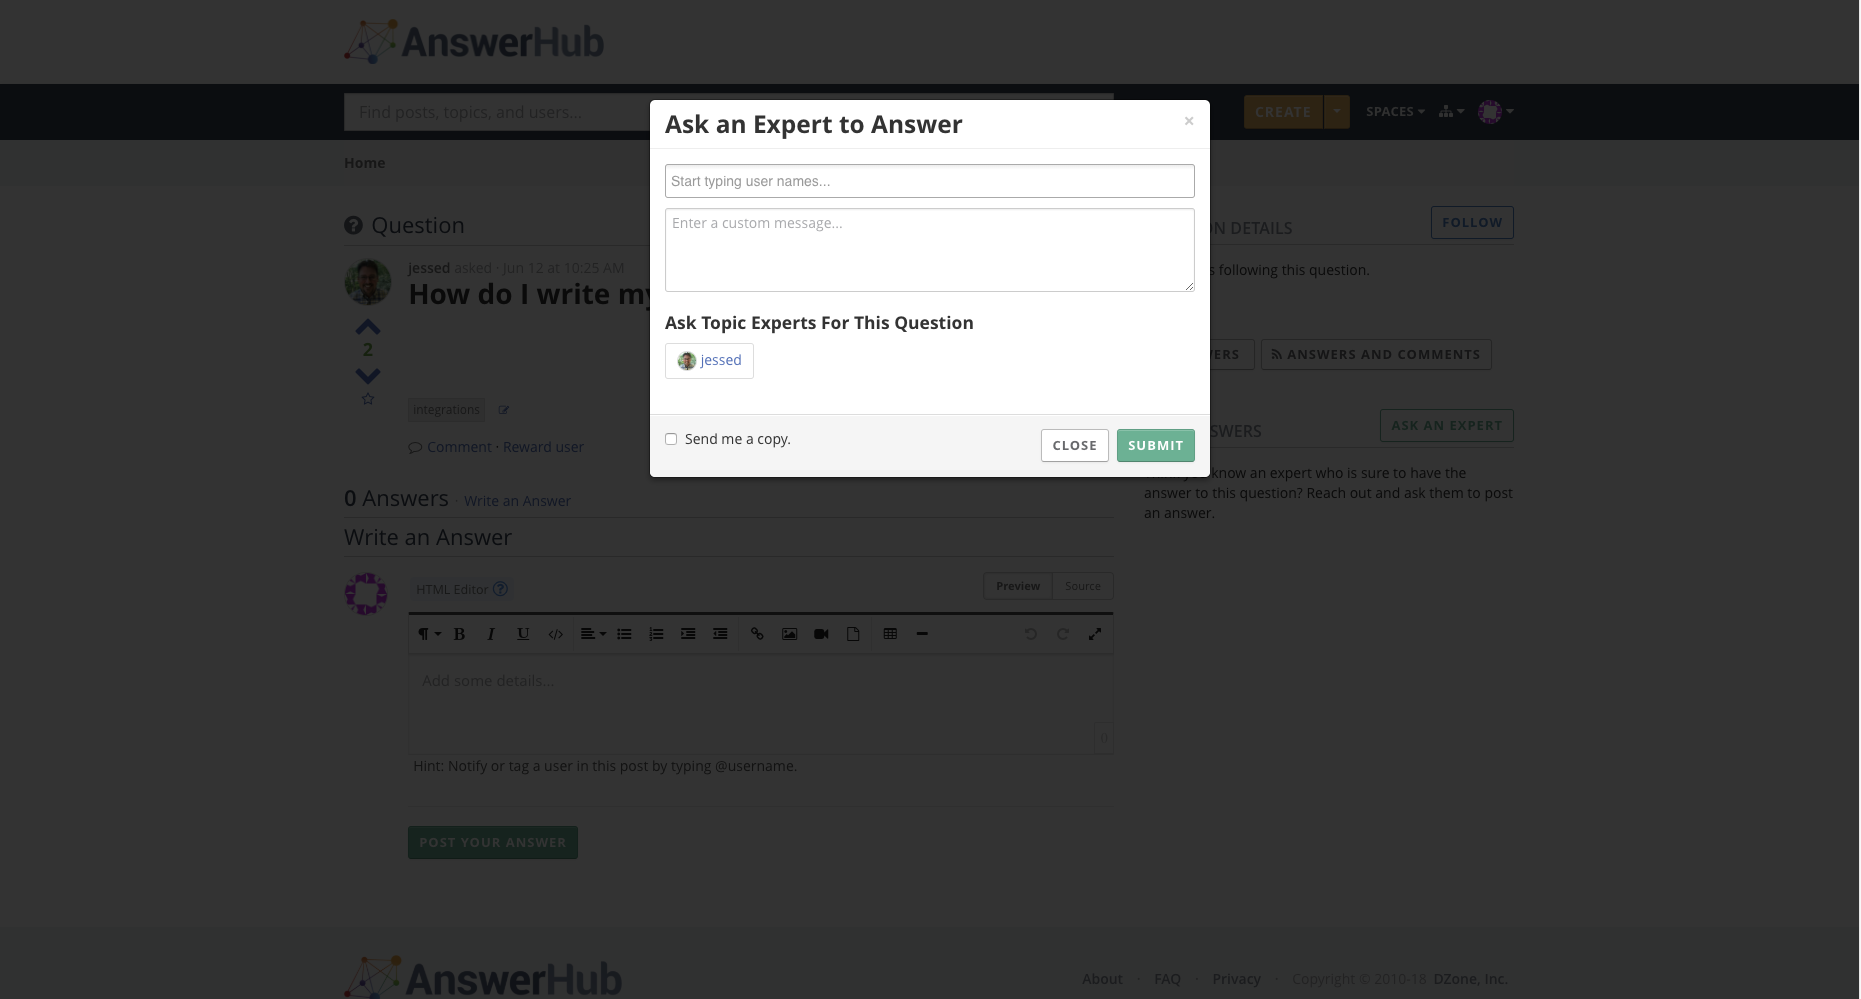 Displays after clicking the "ASK AN EXPERT" button.